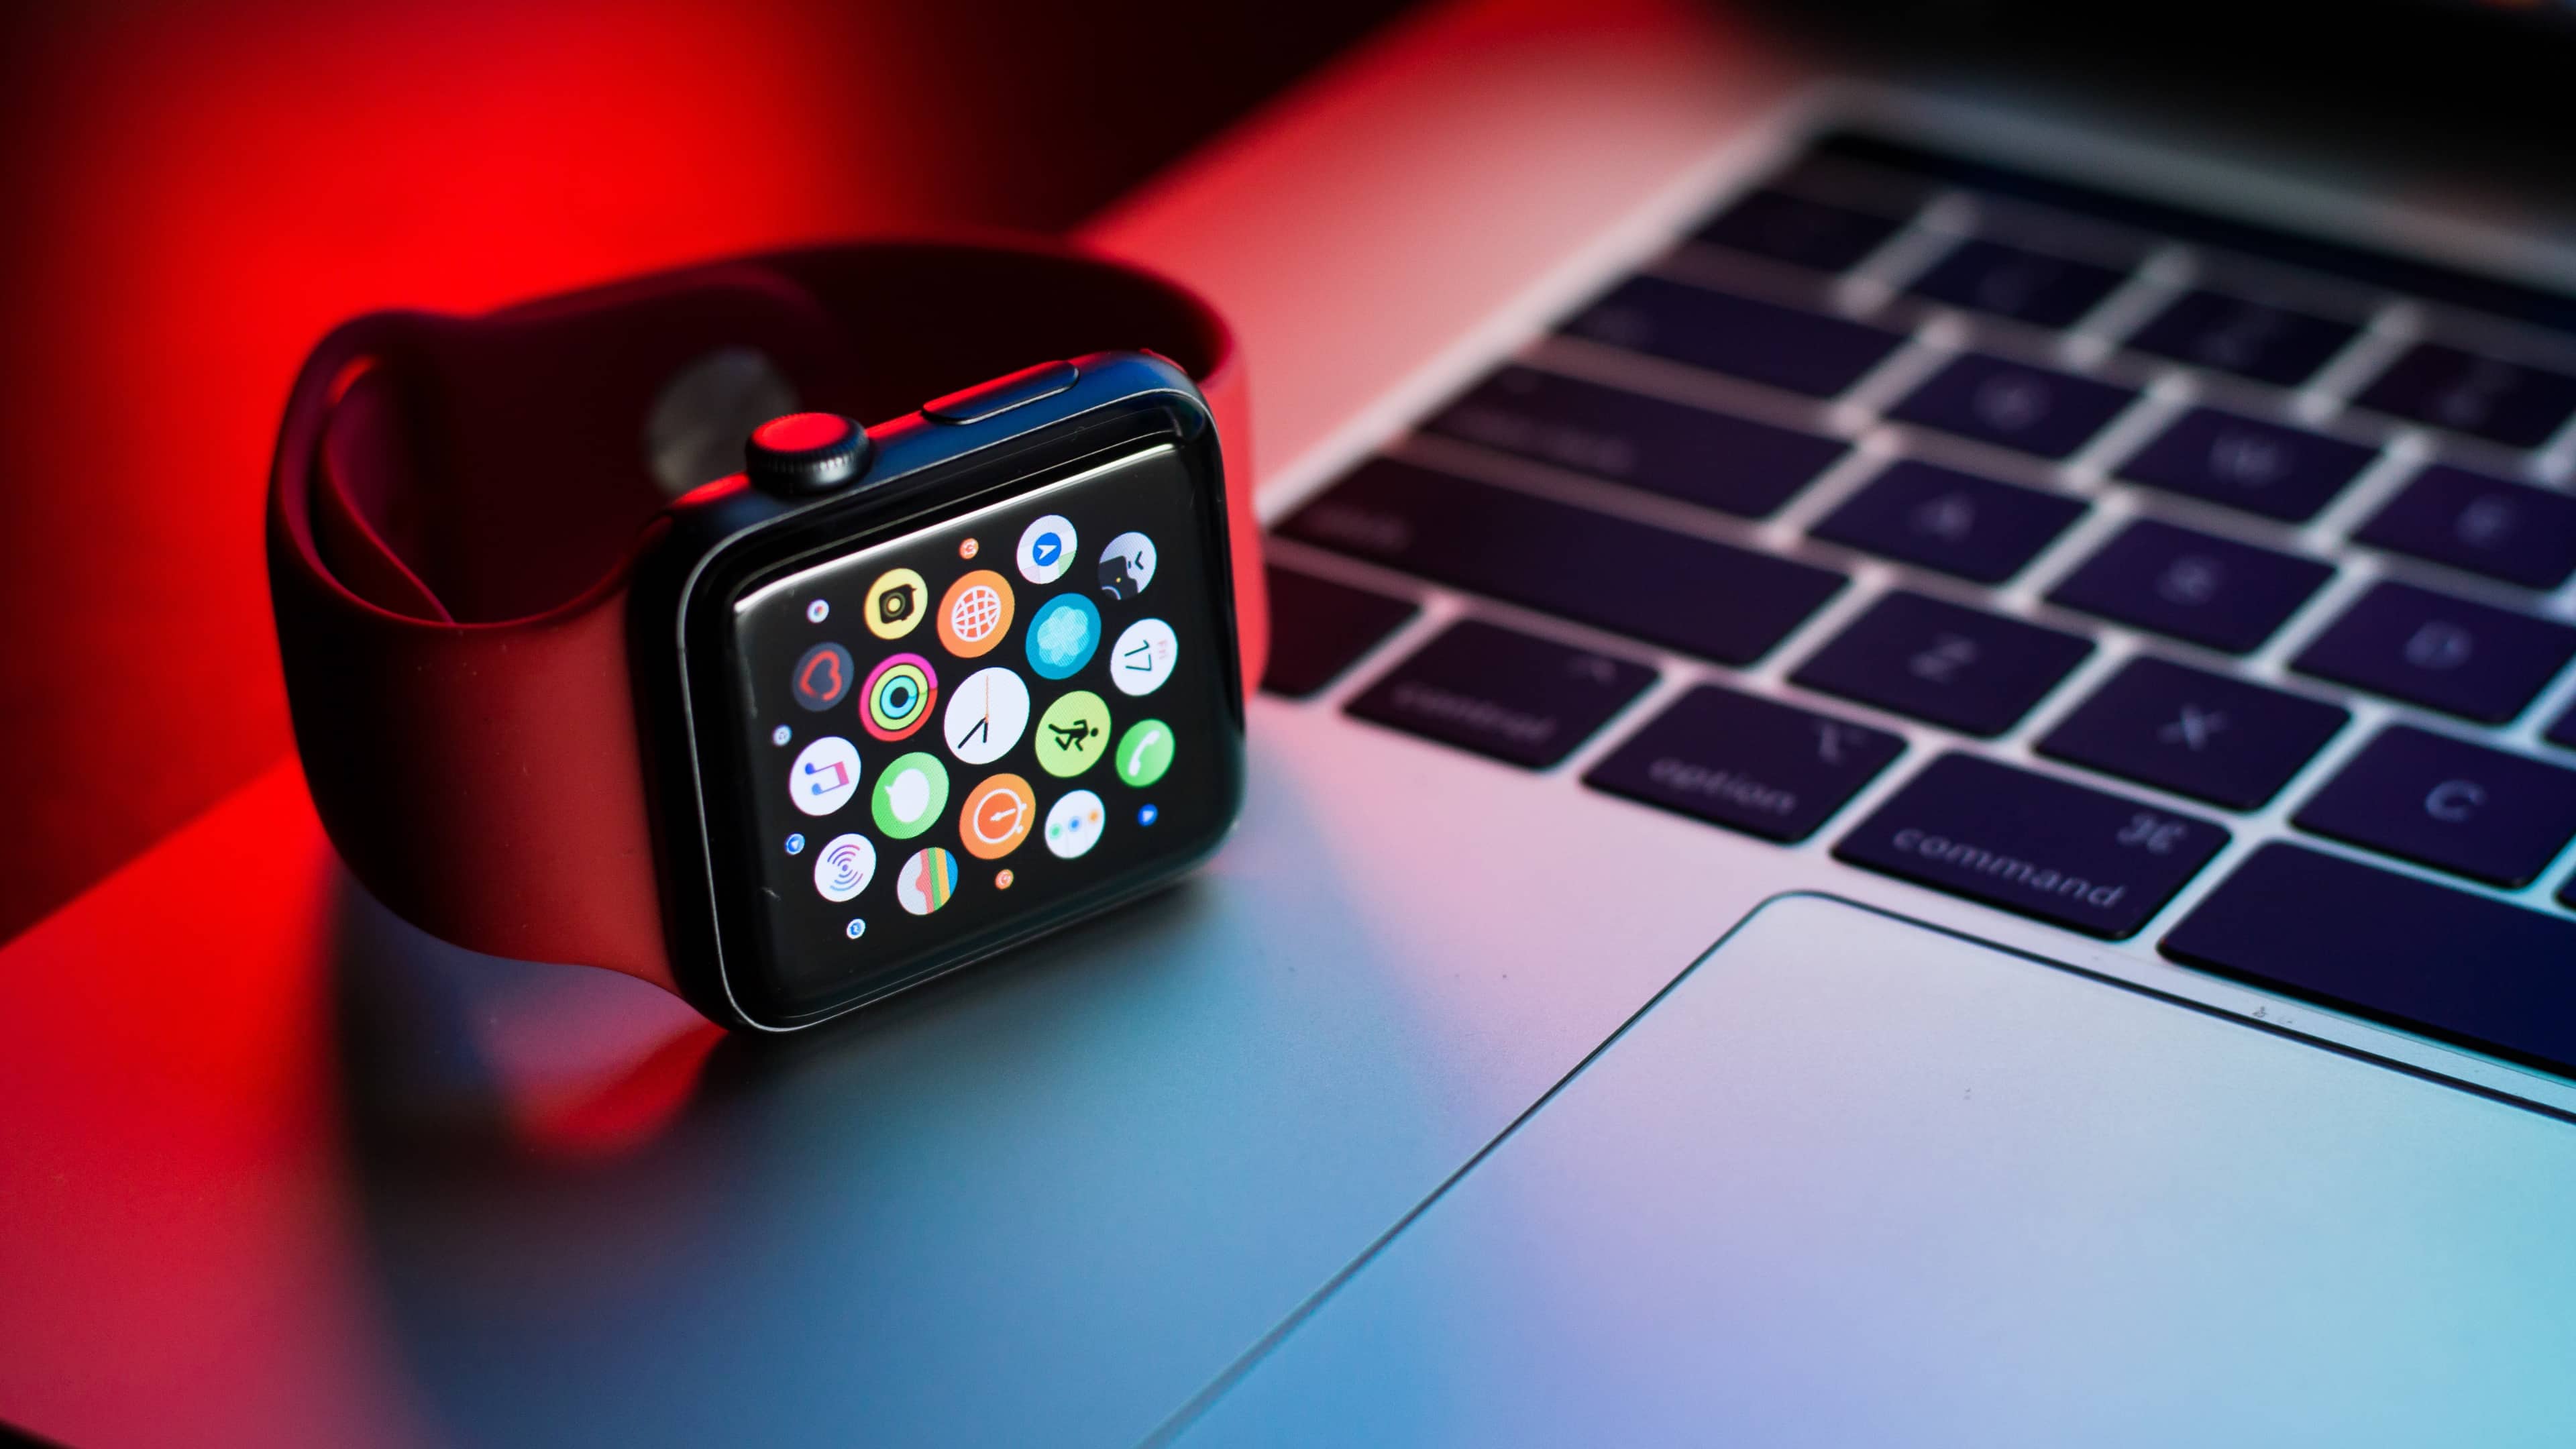 A black Apple Watch Series 7 is shown resting on its side next to the trackpad on Apple's MacBook Pro notebook in this lifestyle product photo